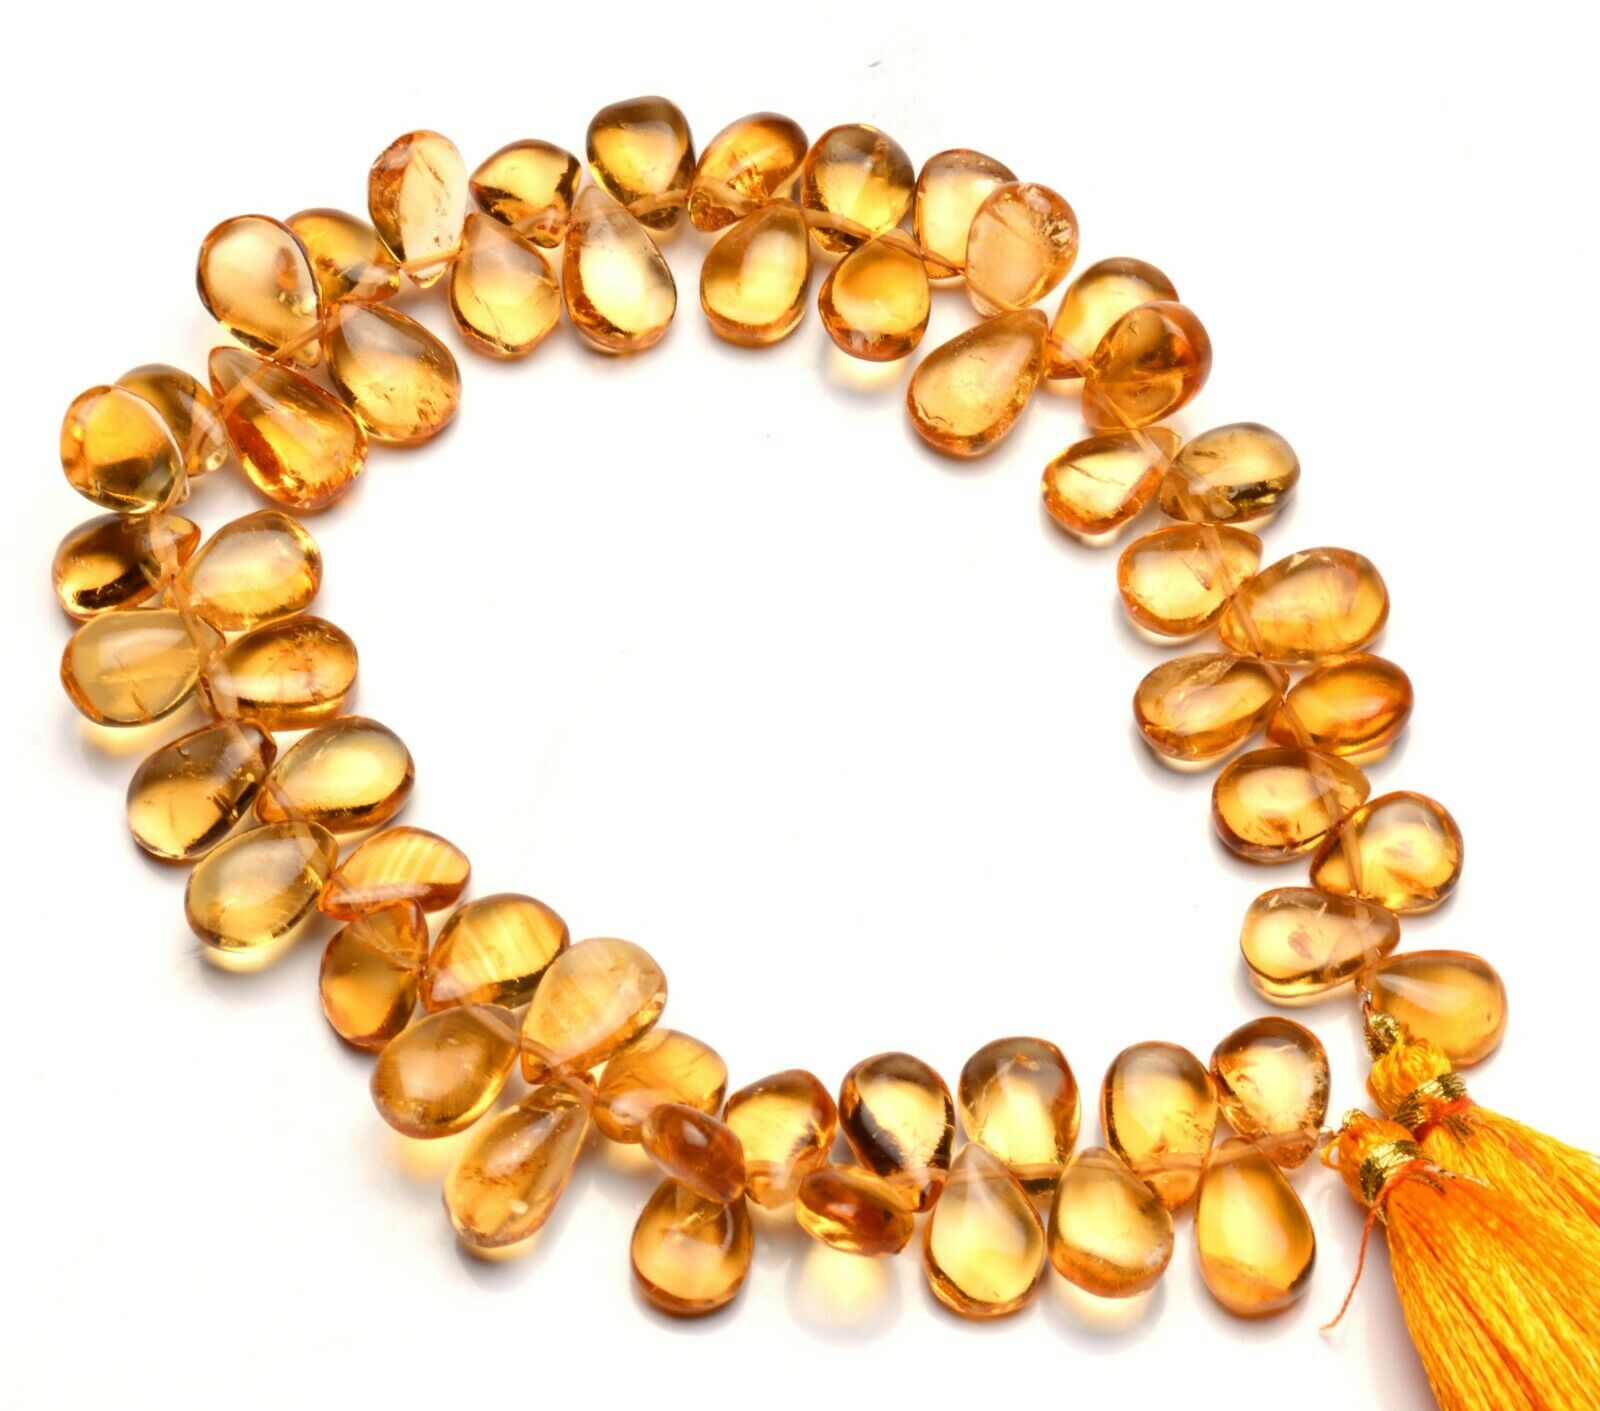 Natural Gem Citrine 11x8 To 12x9mm Smooth Pear Shape Briolette Beads 10" Strand